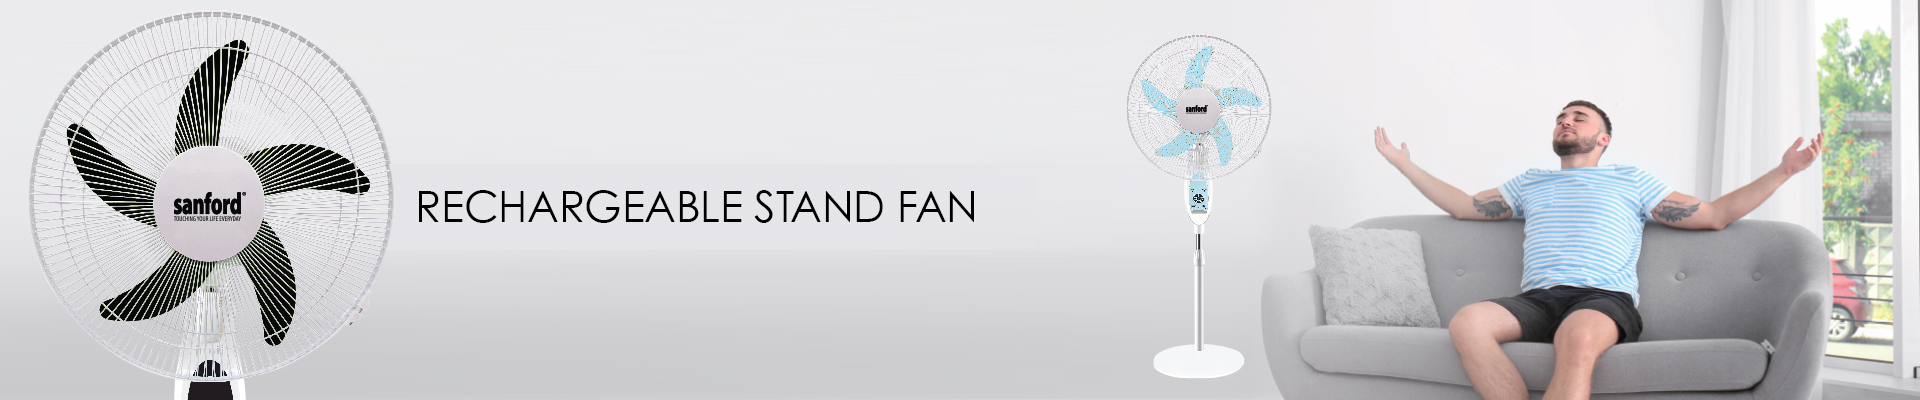 Rechargeable Stand Fan SF6600RSFN